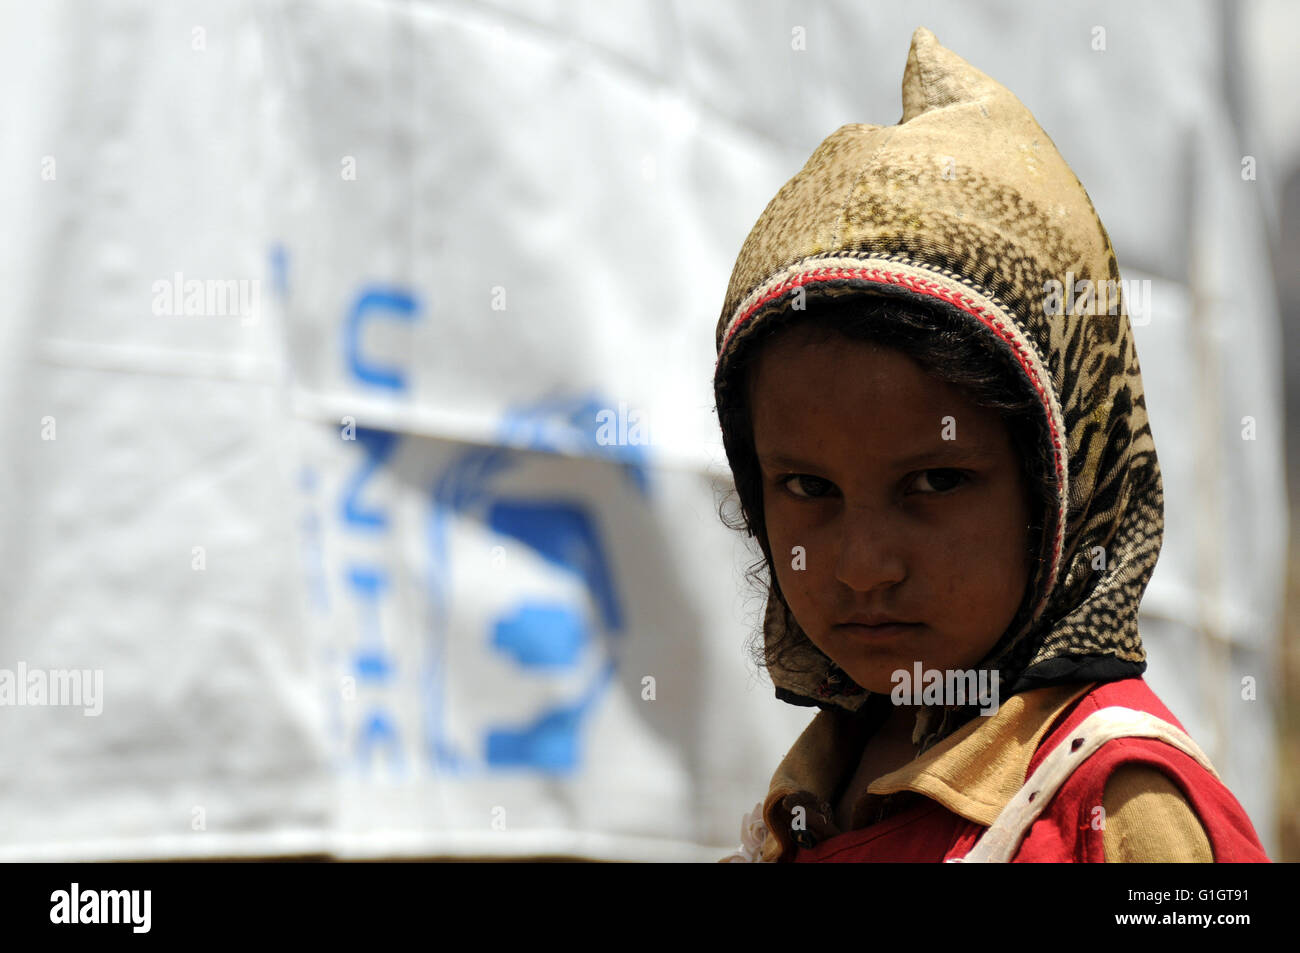 Sanaa, Yemen. 14th May, 2016. A Yemeni internally displaced girl looks on as she stands outside her makeshift shelter at a camp on the outskirts of Amran province, Yemen, on May 14, 2016. The ongoing conflict in Yemen has forcibly displaced more than 2.4 million people in Yemen. © Hani Ali/Xinhua/Alamy Live News Stock Photo